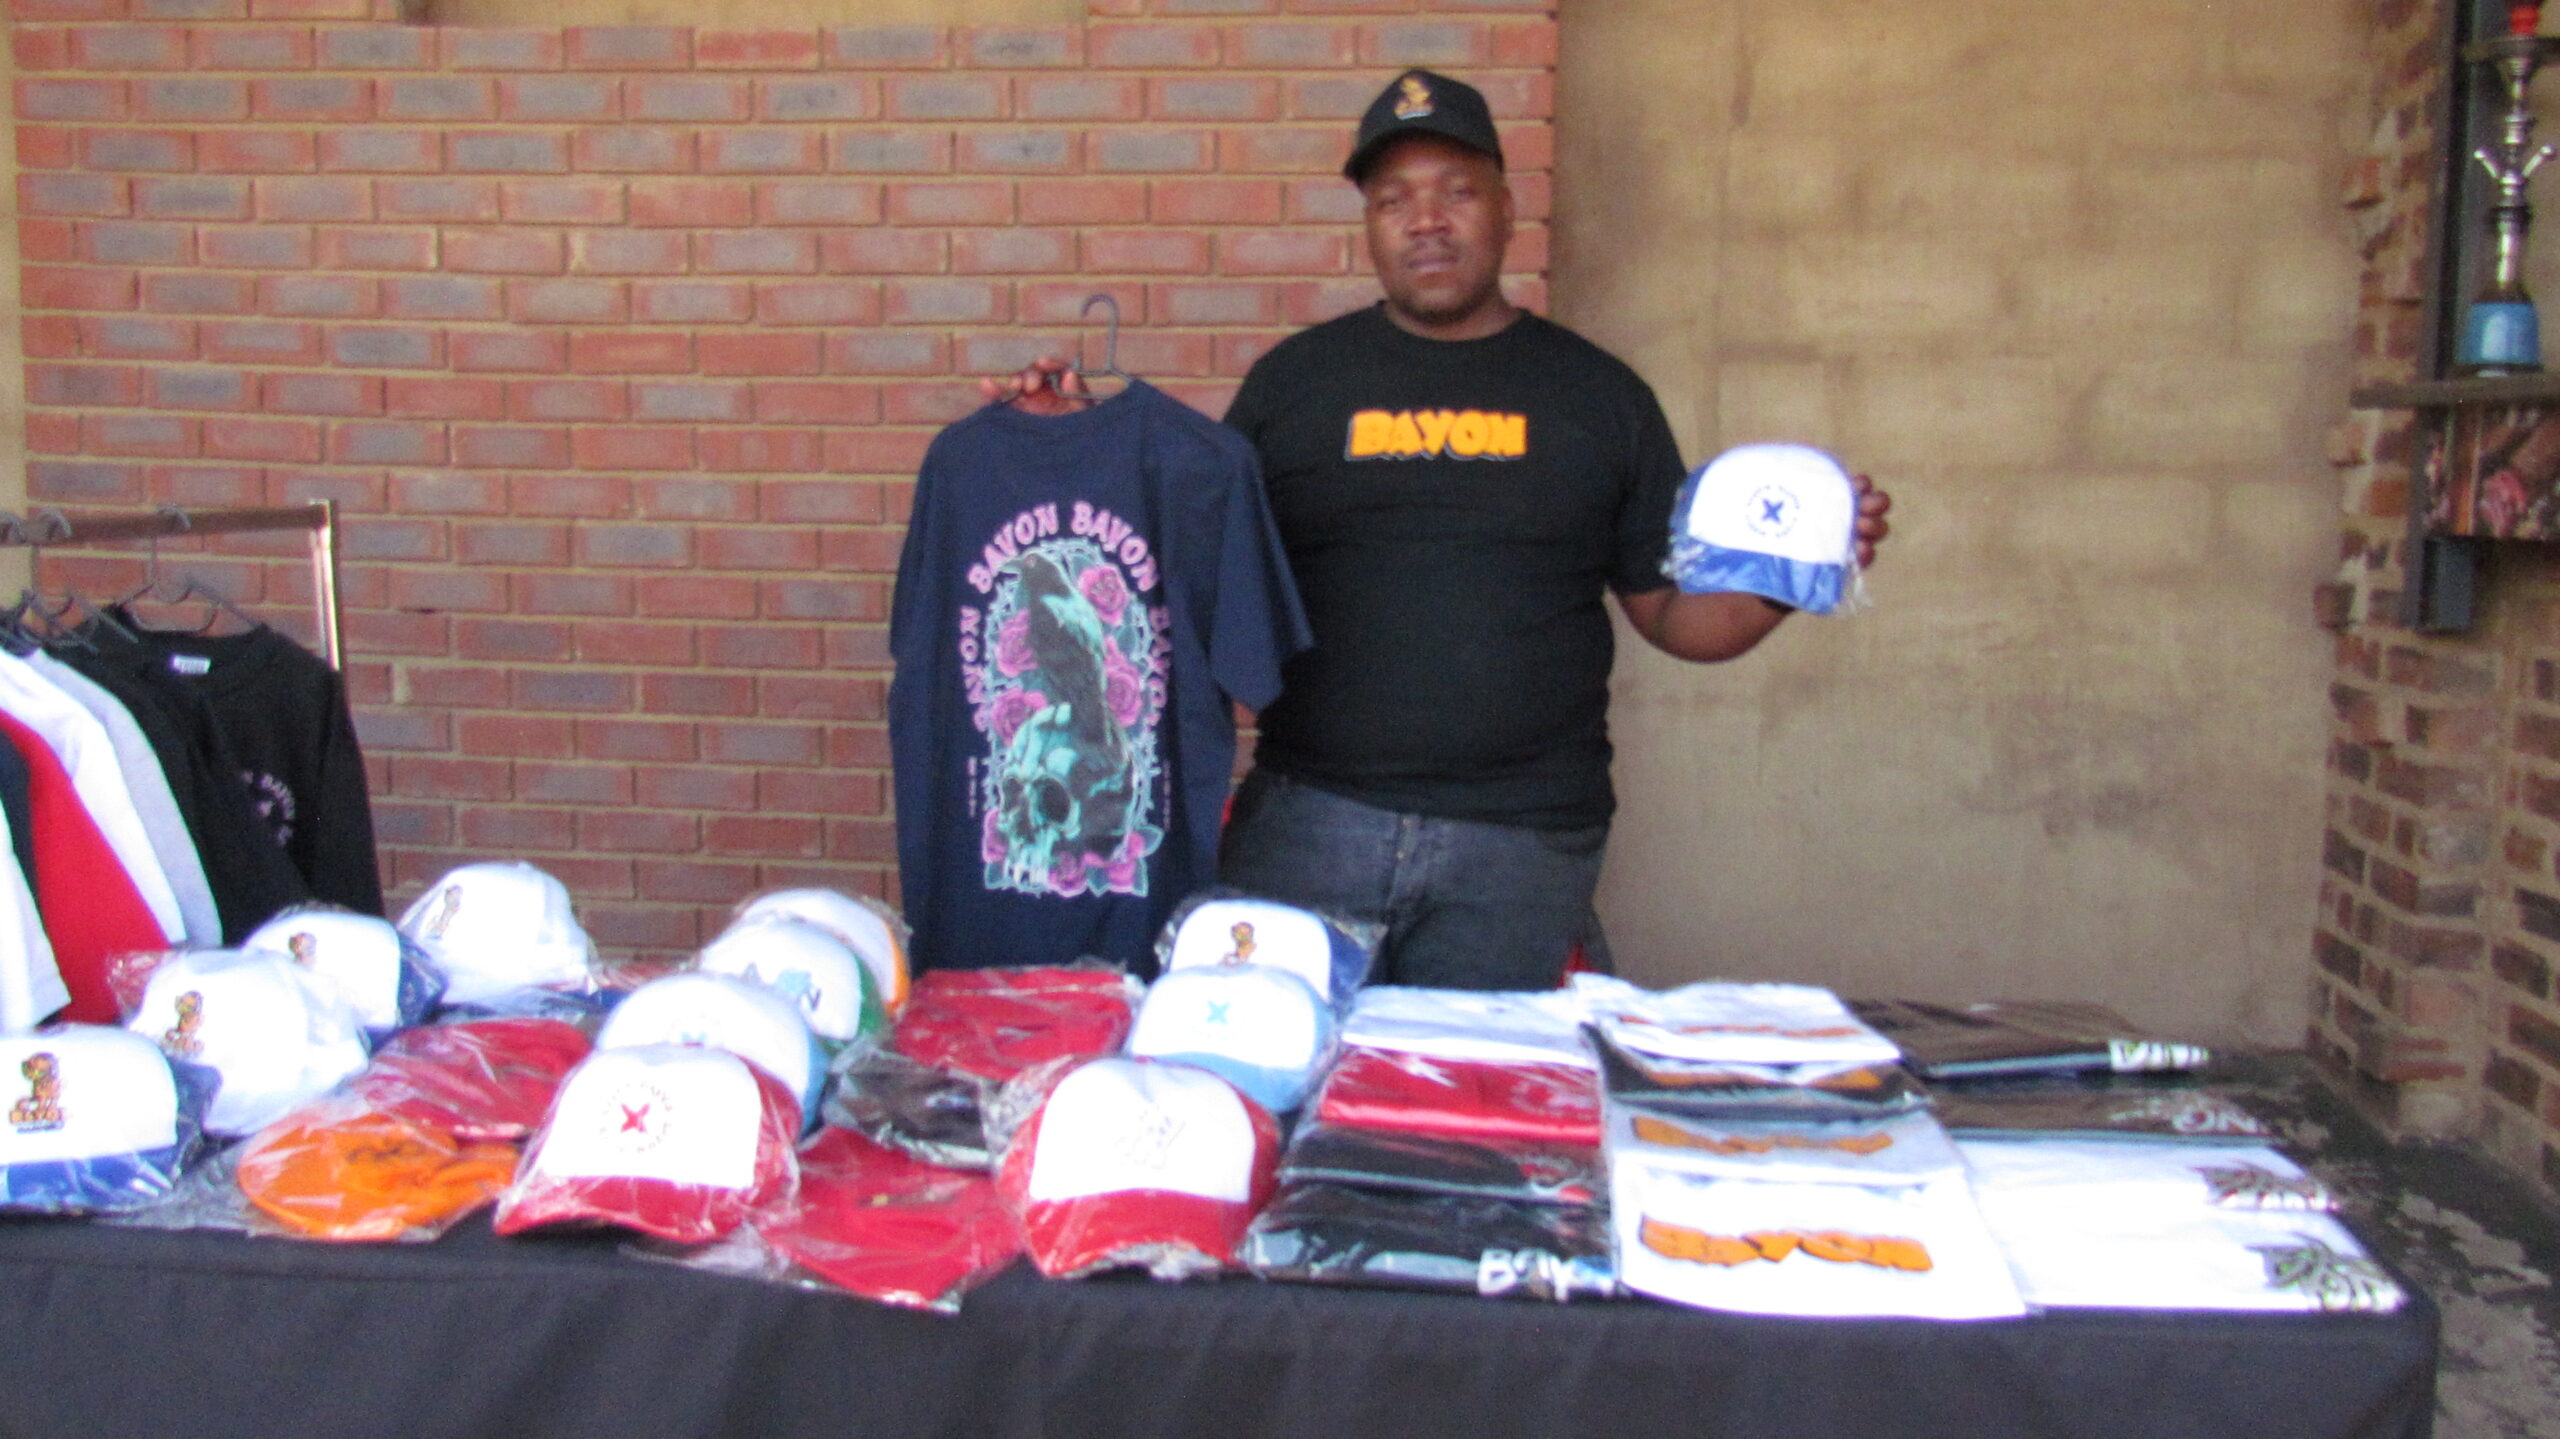 Bayon brand owner James Ngwane show casing his clothing brand 